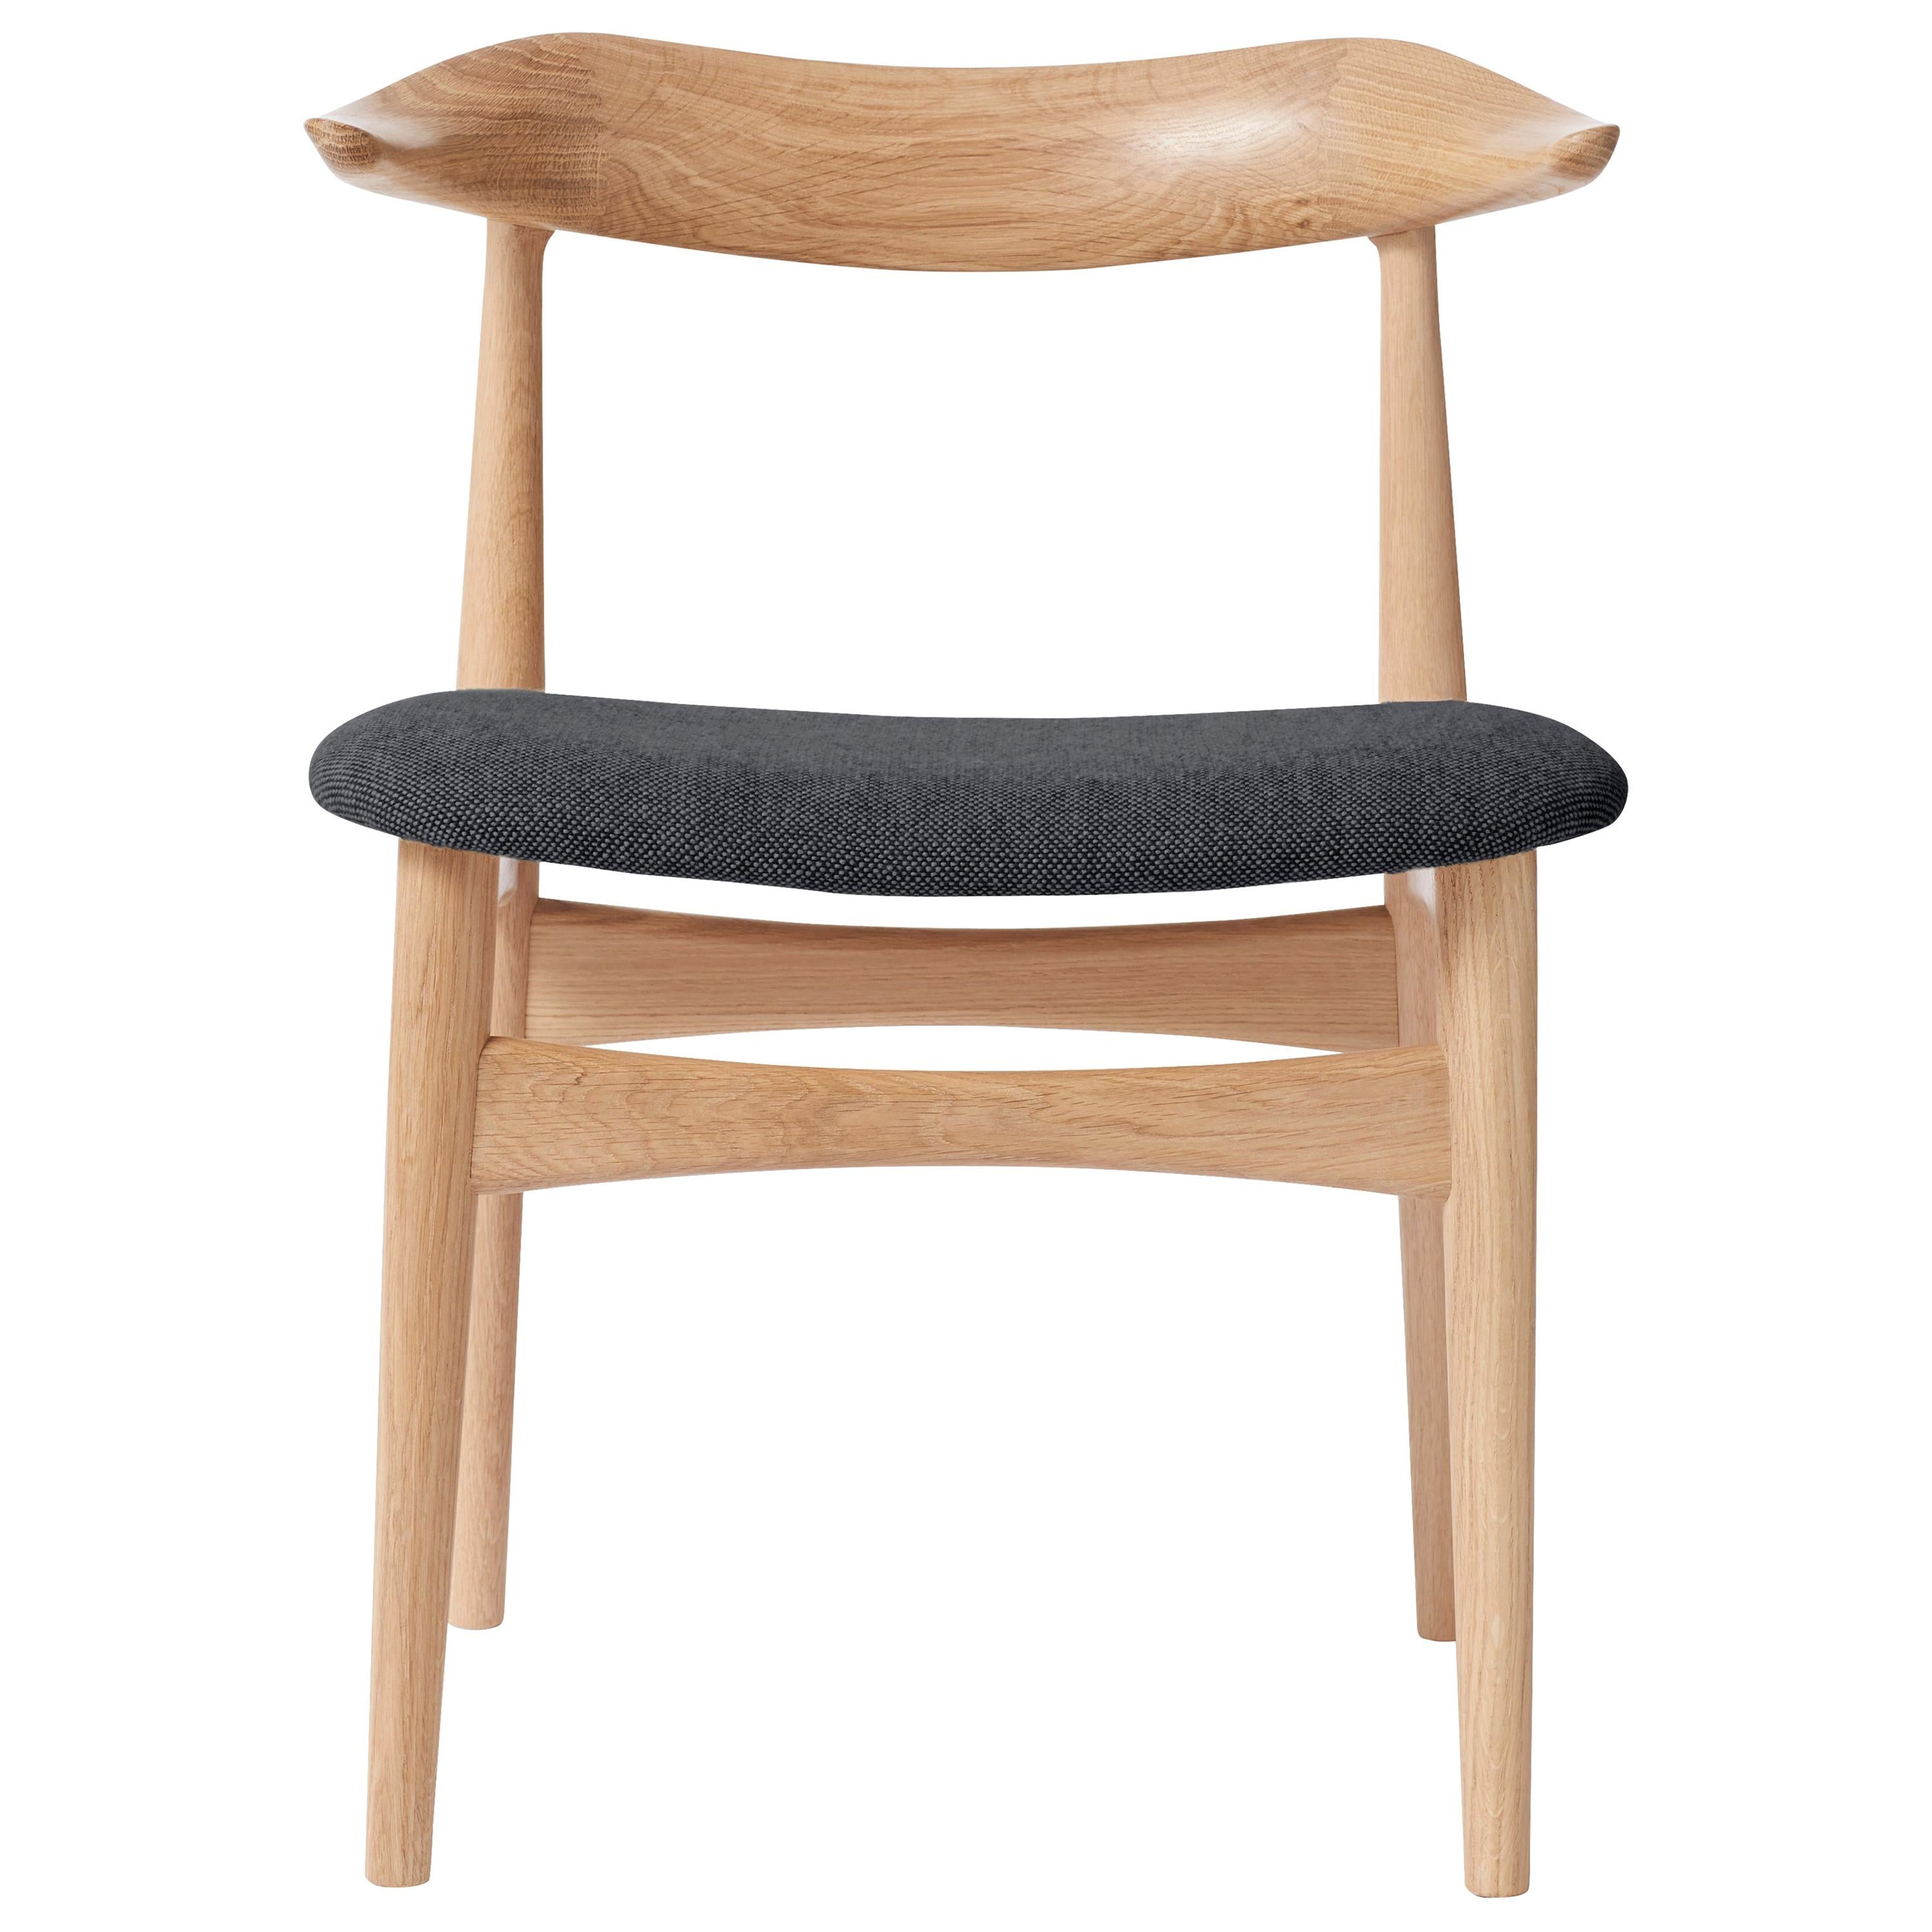 For Sale: Black (Hallingdal 180) Cow Horn Oak Chair, by Knud Færch from Warm Nordic